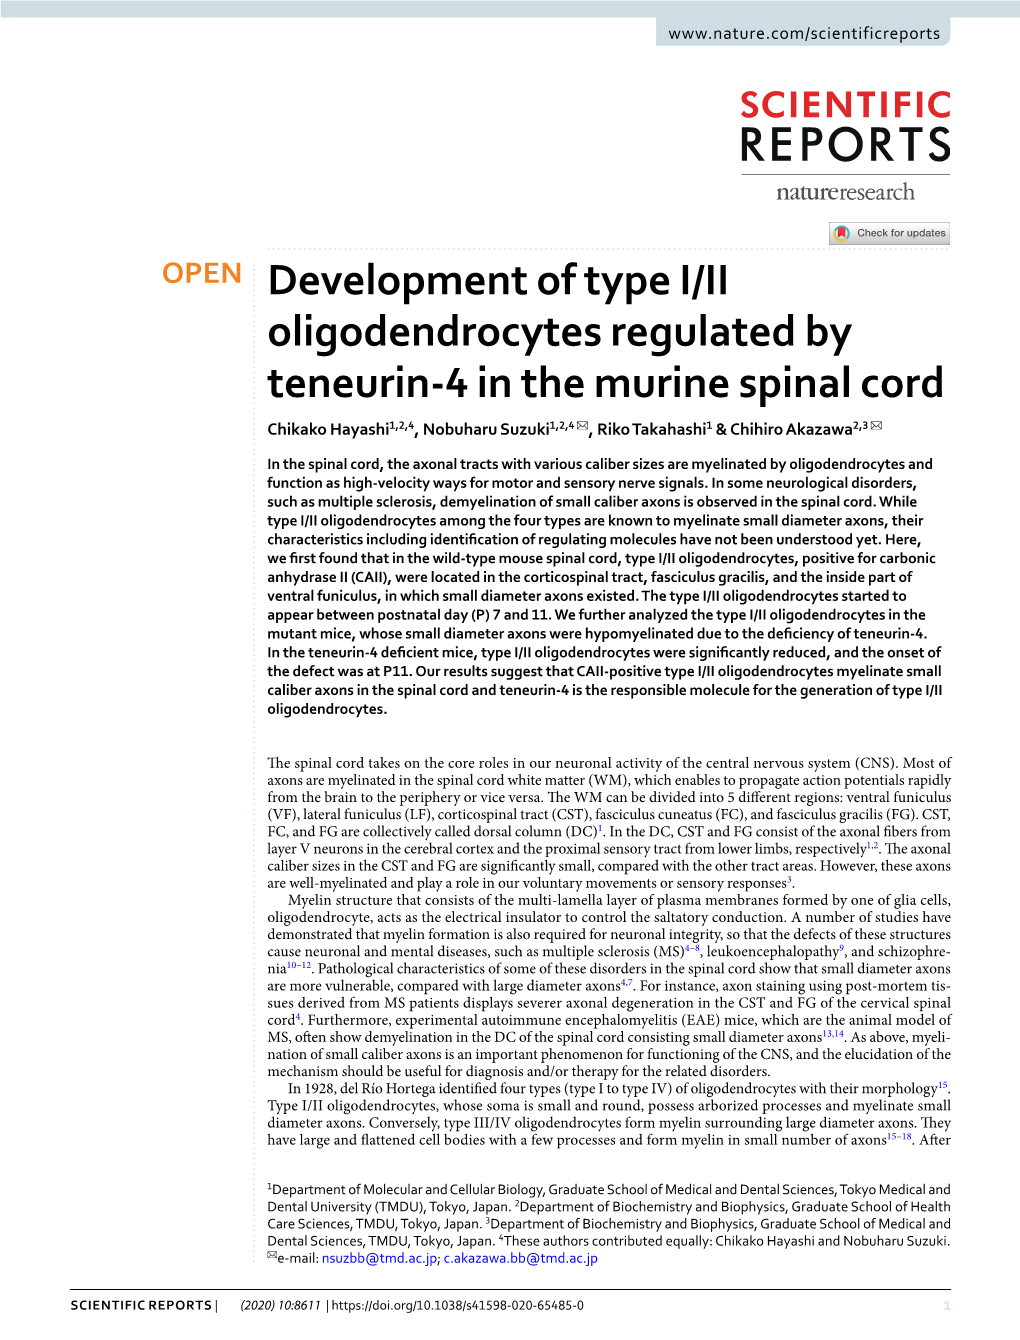 Development of Type I/II Oligodendrocytes Regulated by Teneurin-4 in the Murine Spinal Cord